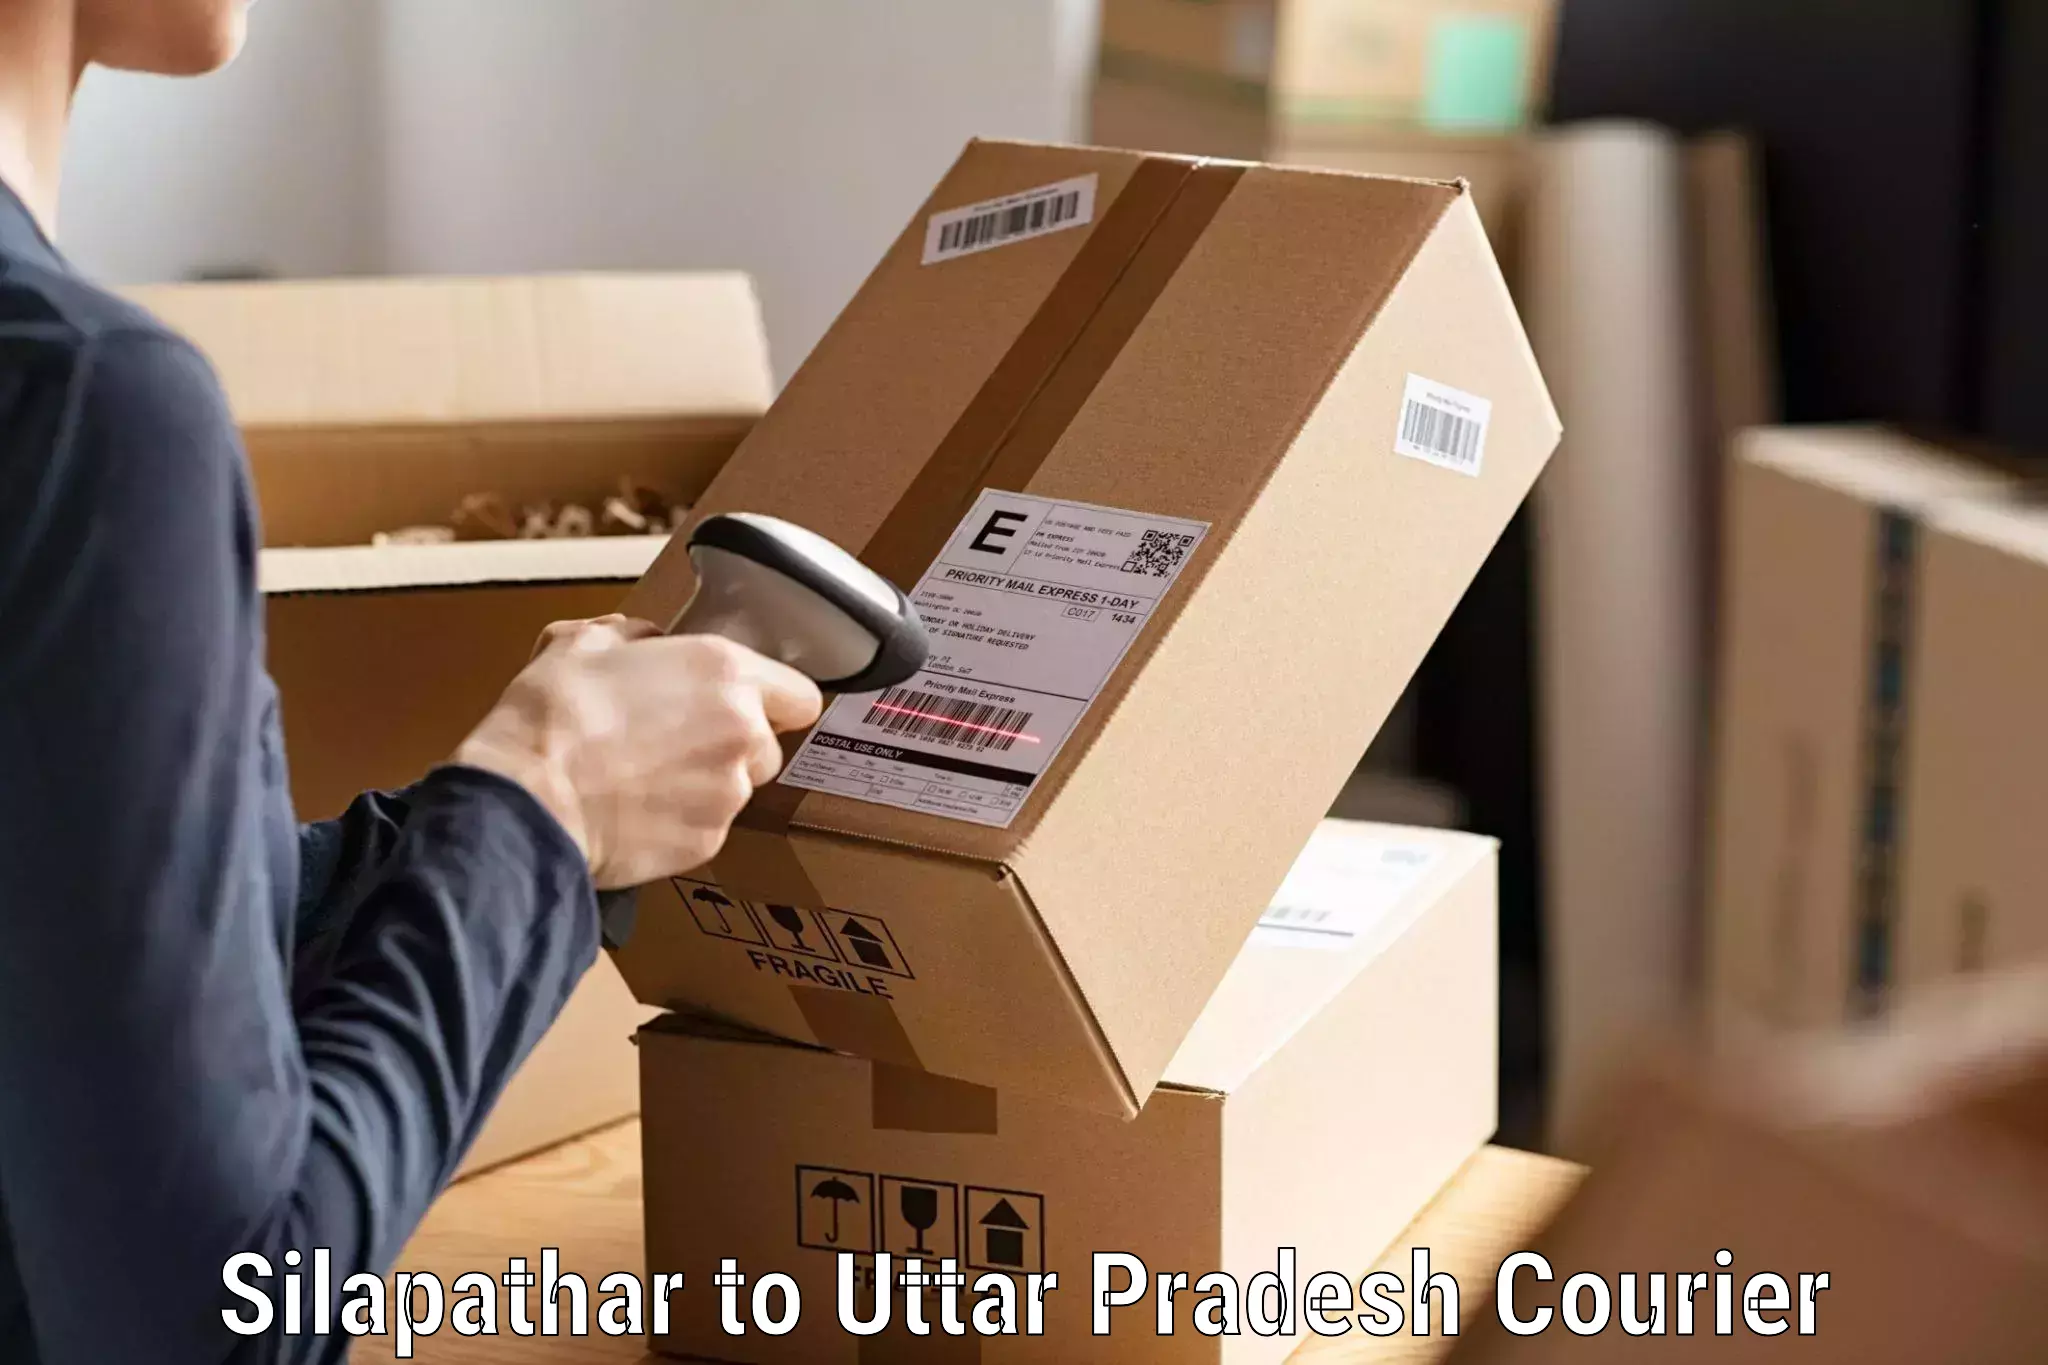 Ocean freight courier in Silapathar to Kanpur